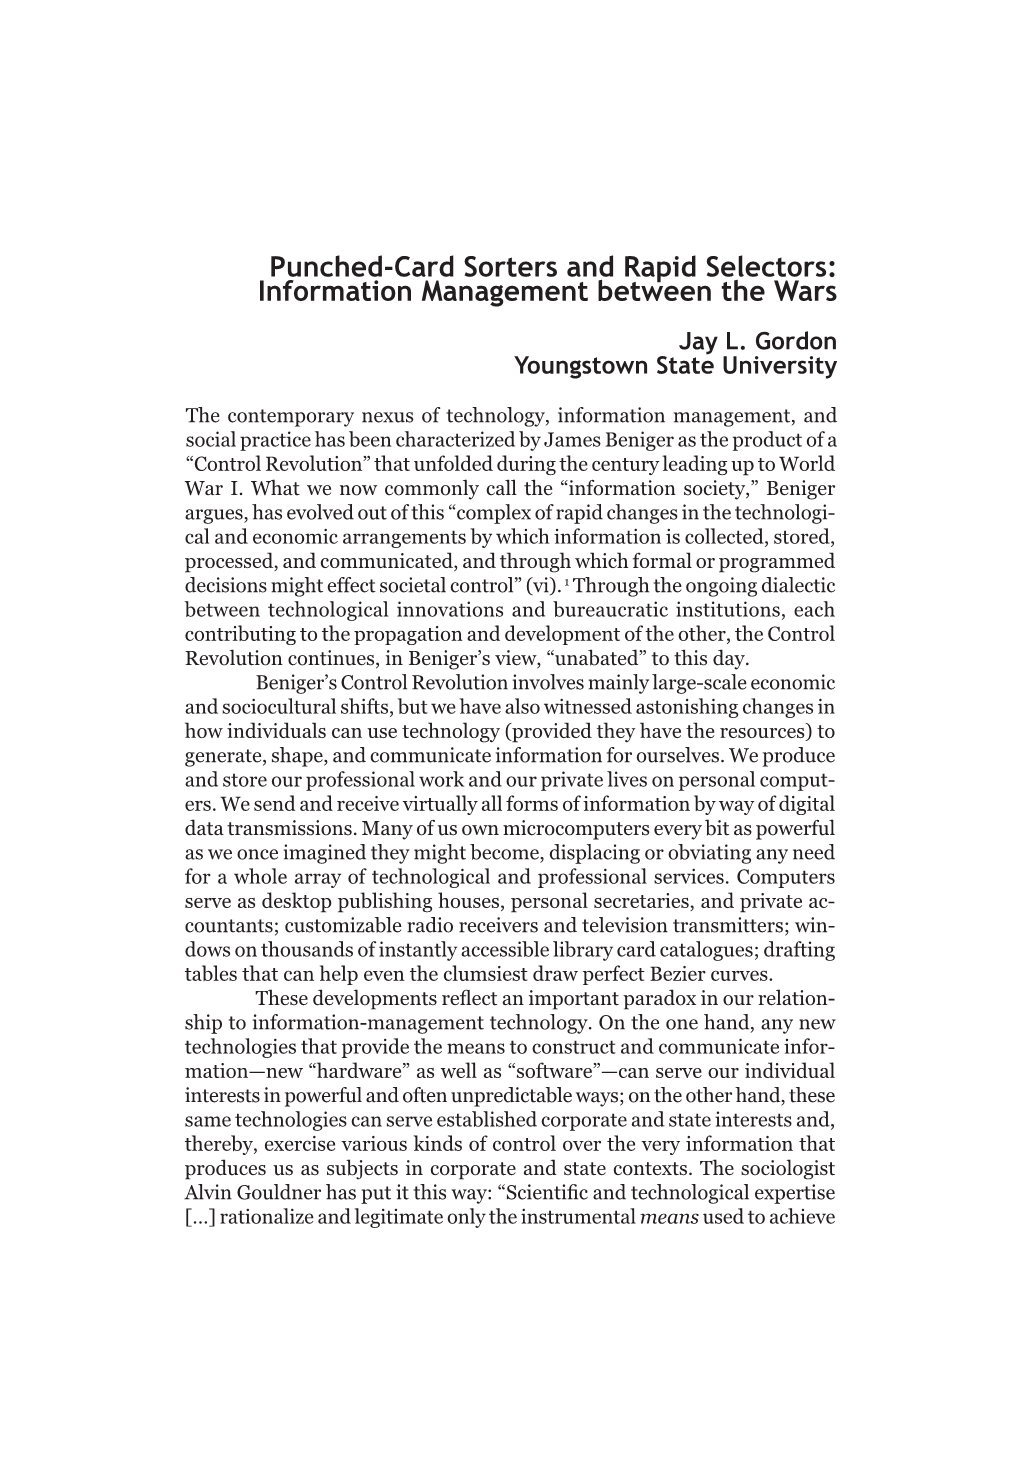 Punched-Card Sorters and Rapid Selectors: Information Management Between the Wars Jay L